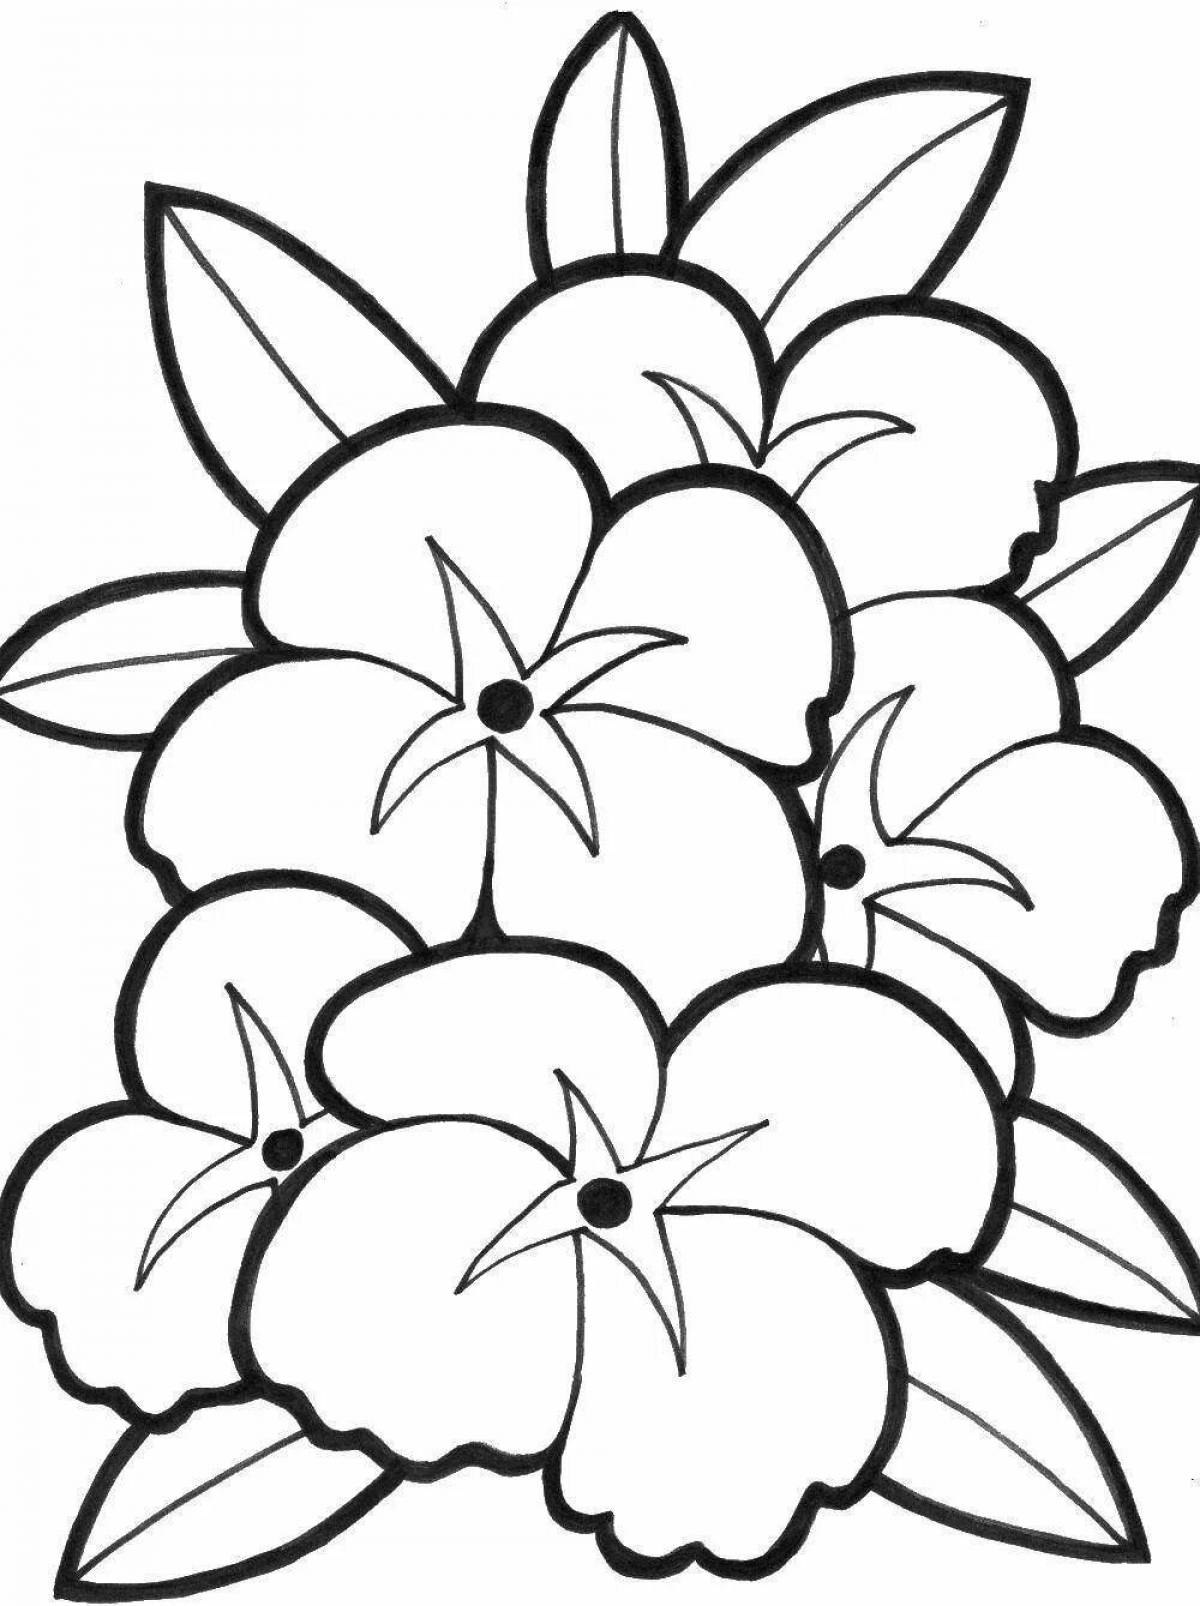 Awesome coloring pages beautiful simple page